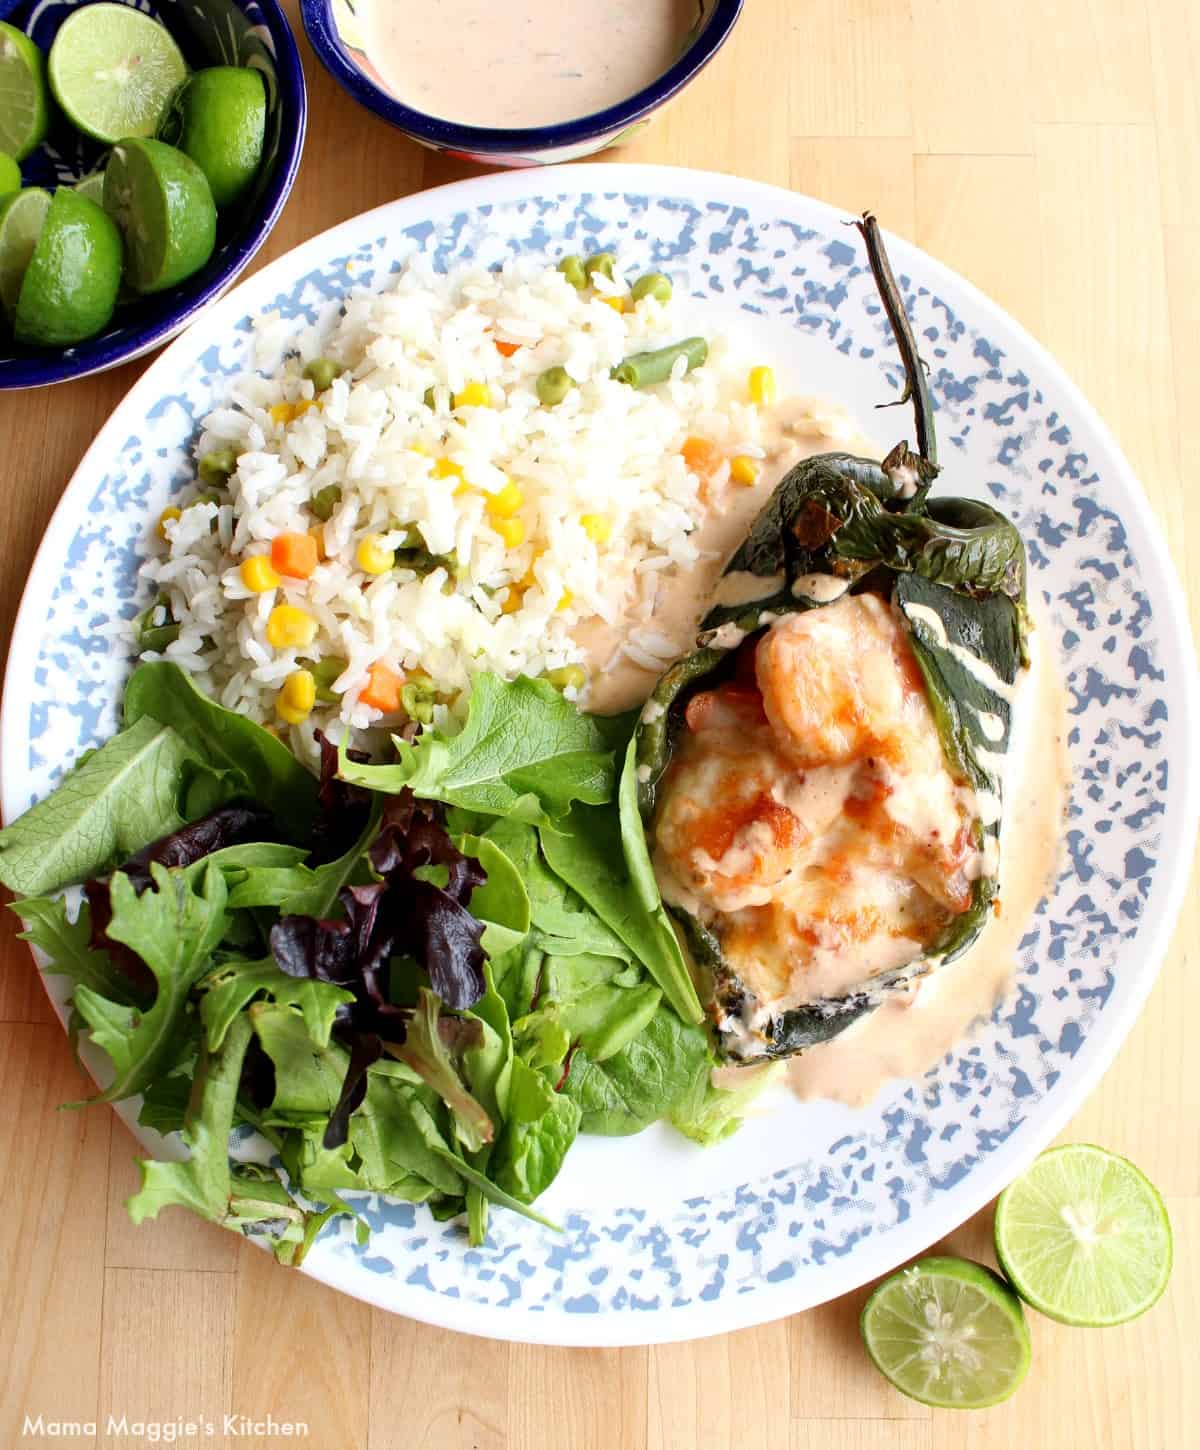 Shrimp Chile Relleno served on a plate next to a salad and rice.